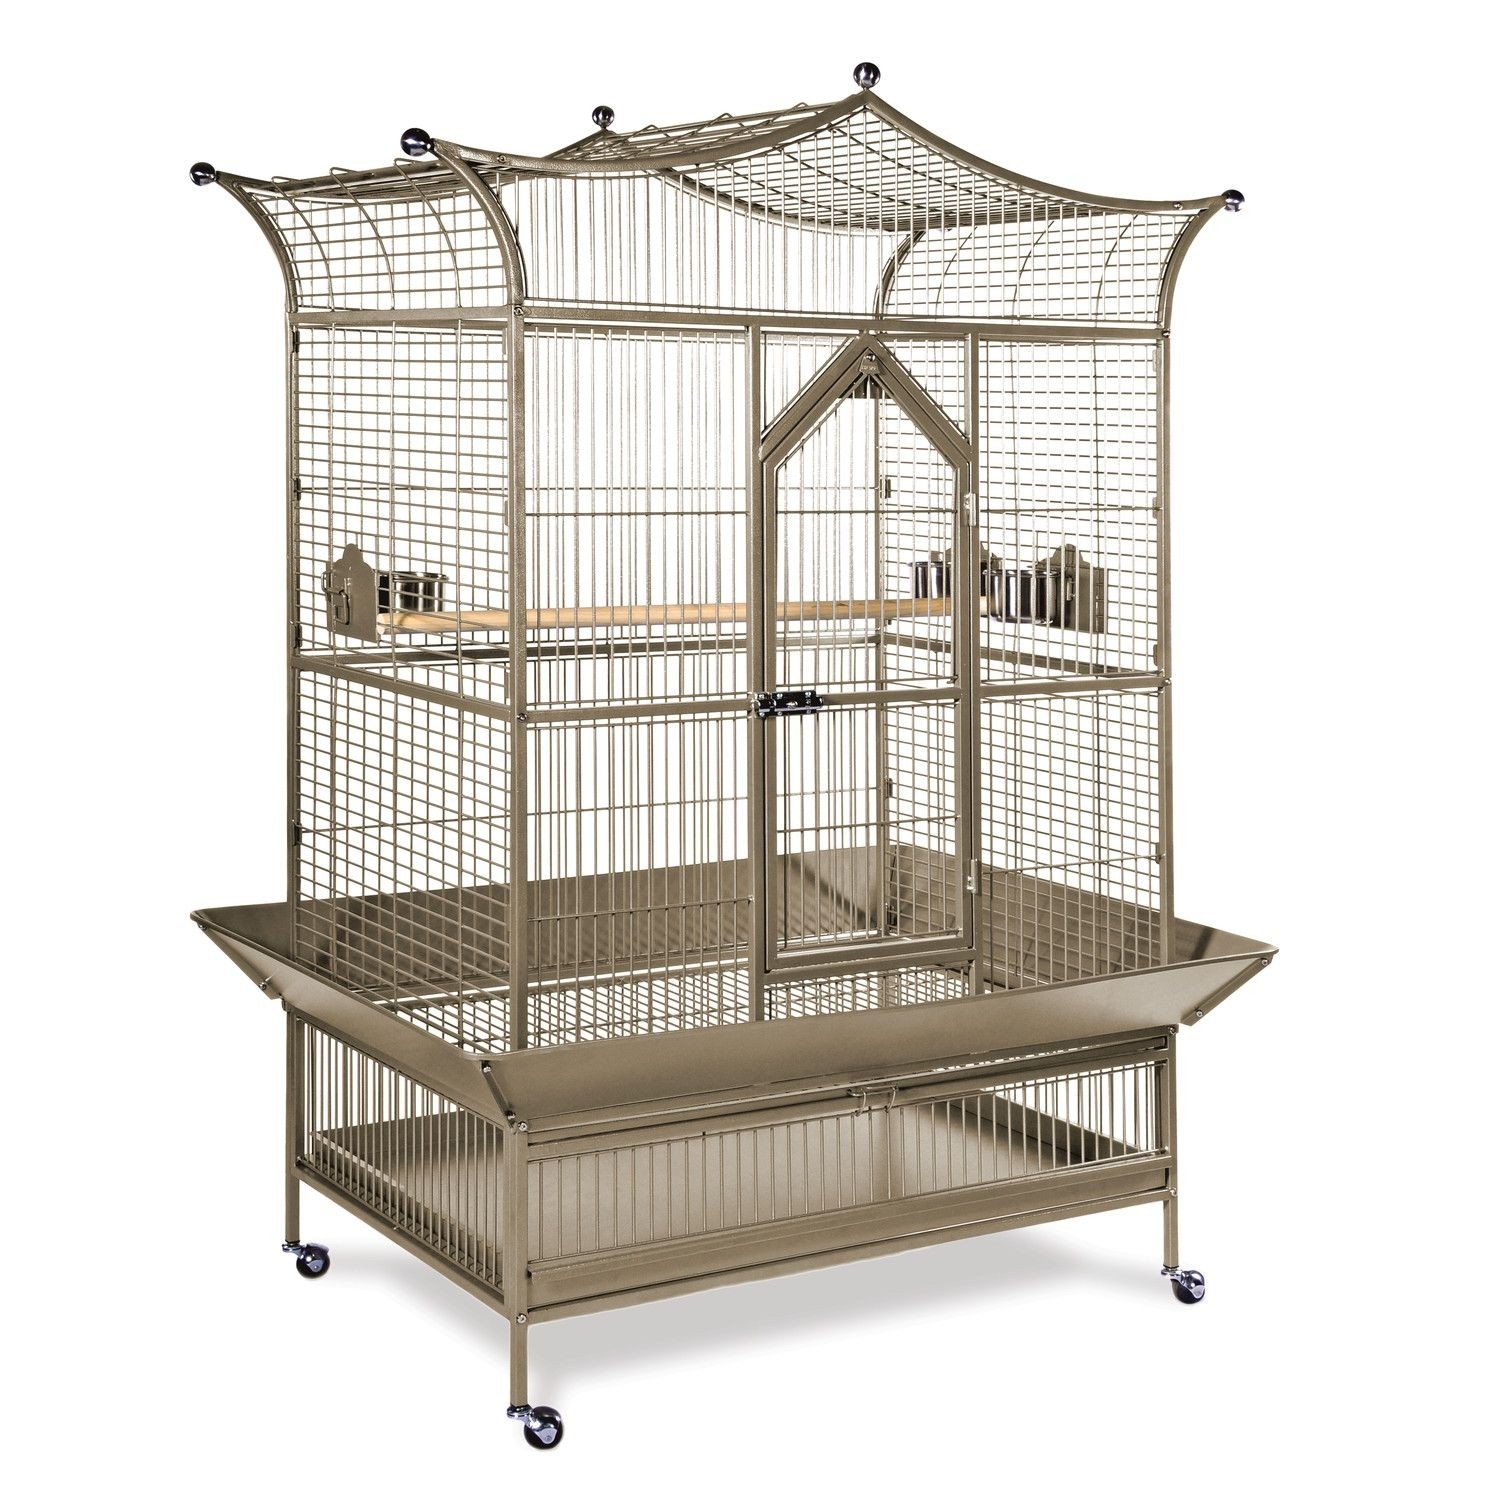 Signature Series Royalty Large Bird Cage